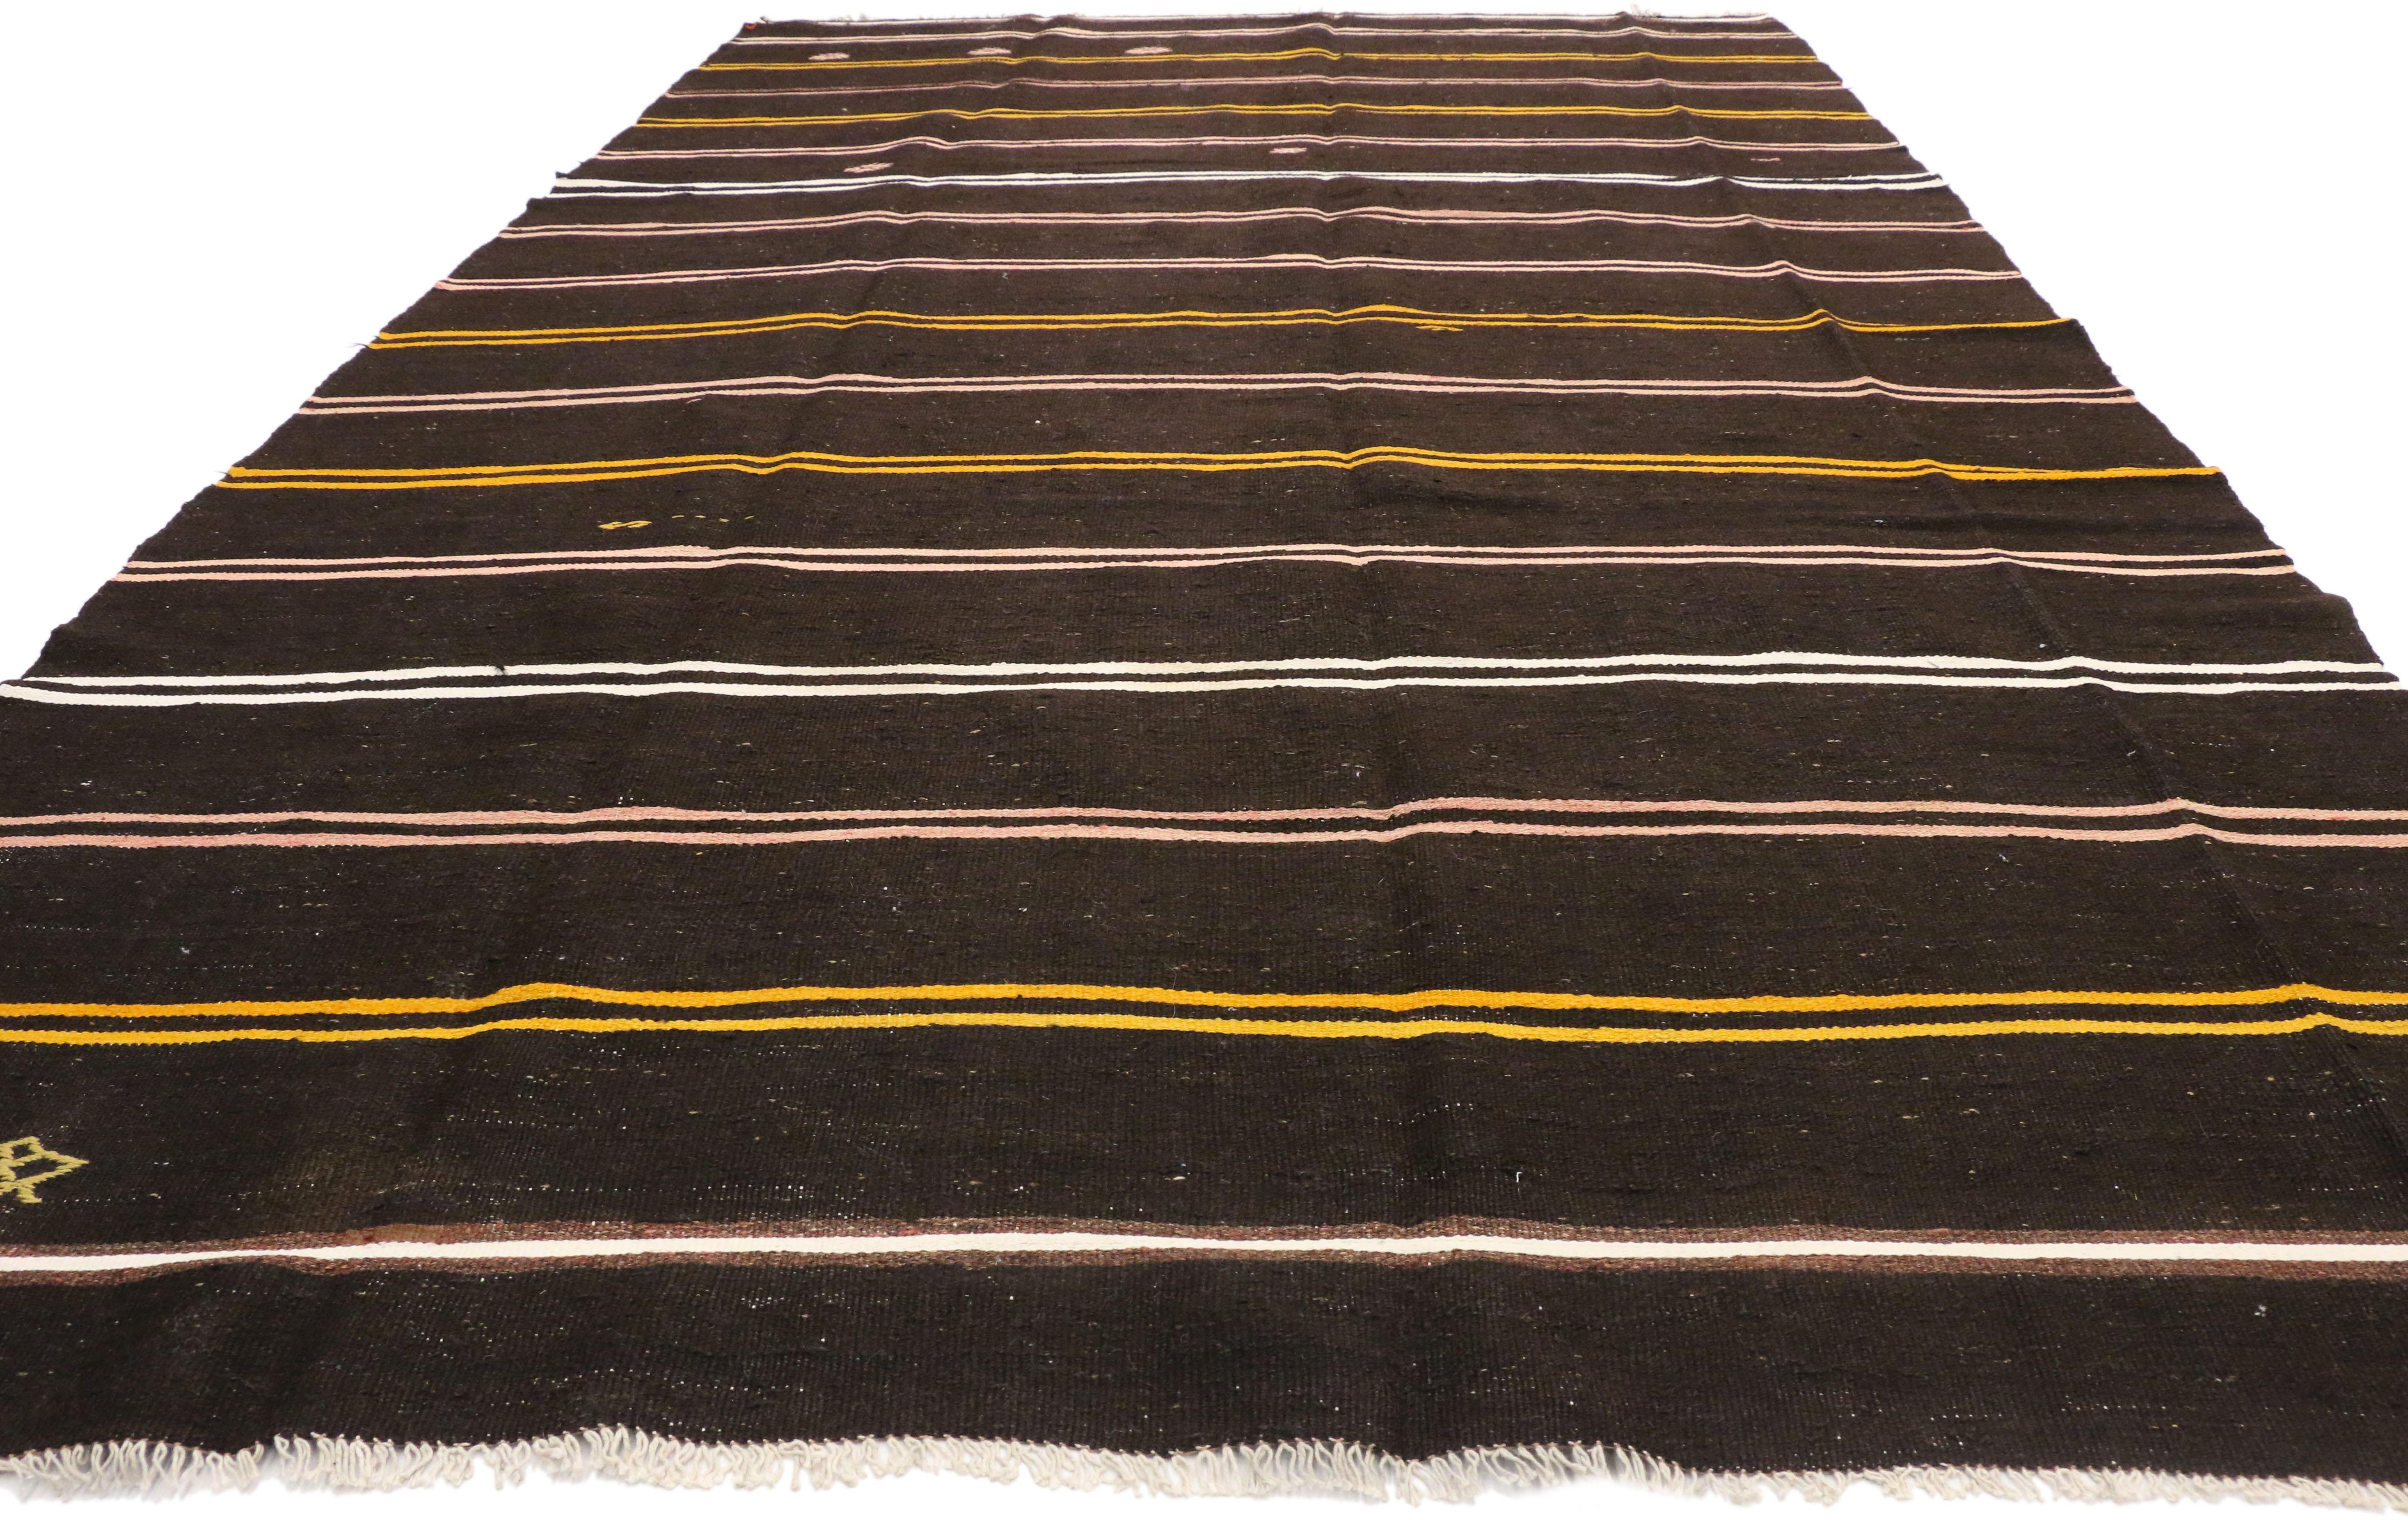 Hand-Woven Vintage Turkish Kilim Rug, Flat-Weave Striped Kilim Area Rug with Tribal Style For Sale